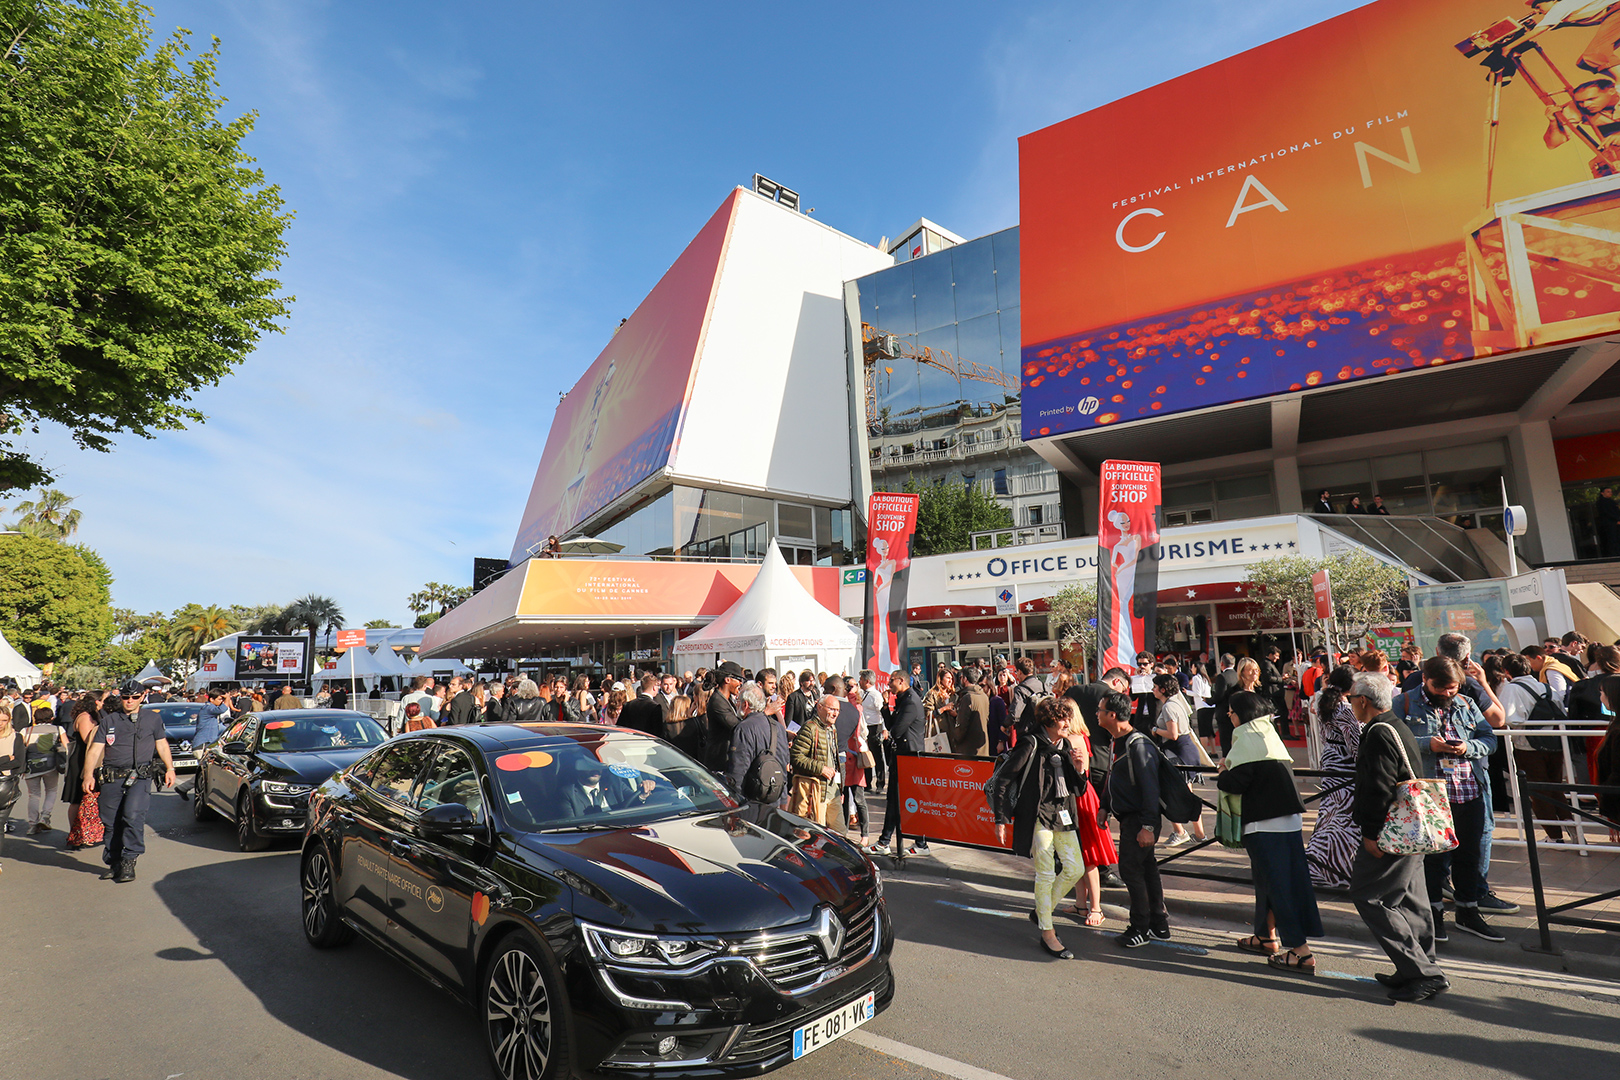 The official vehicles of the Festival de Cannes